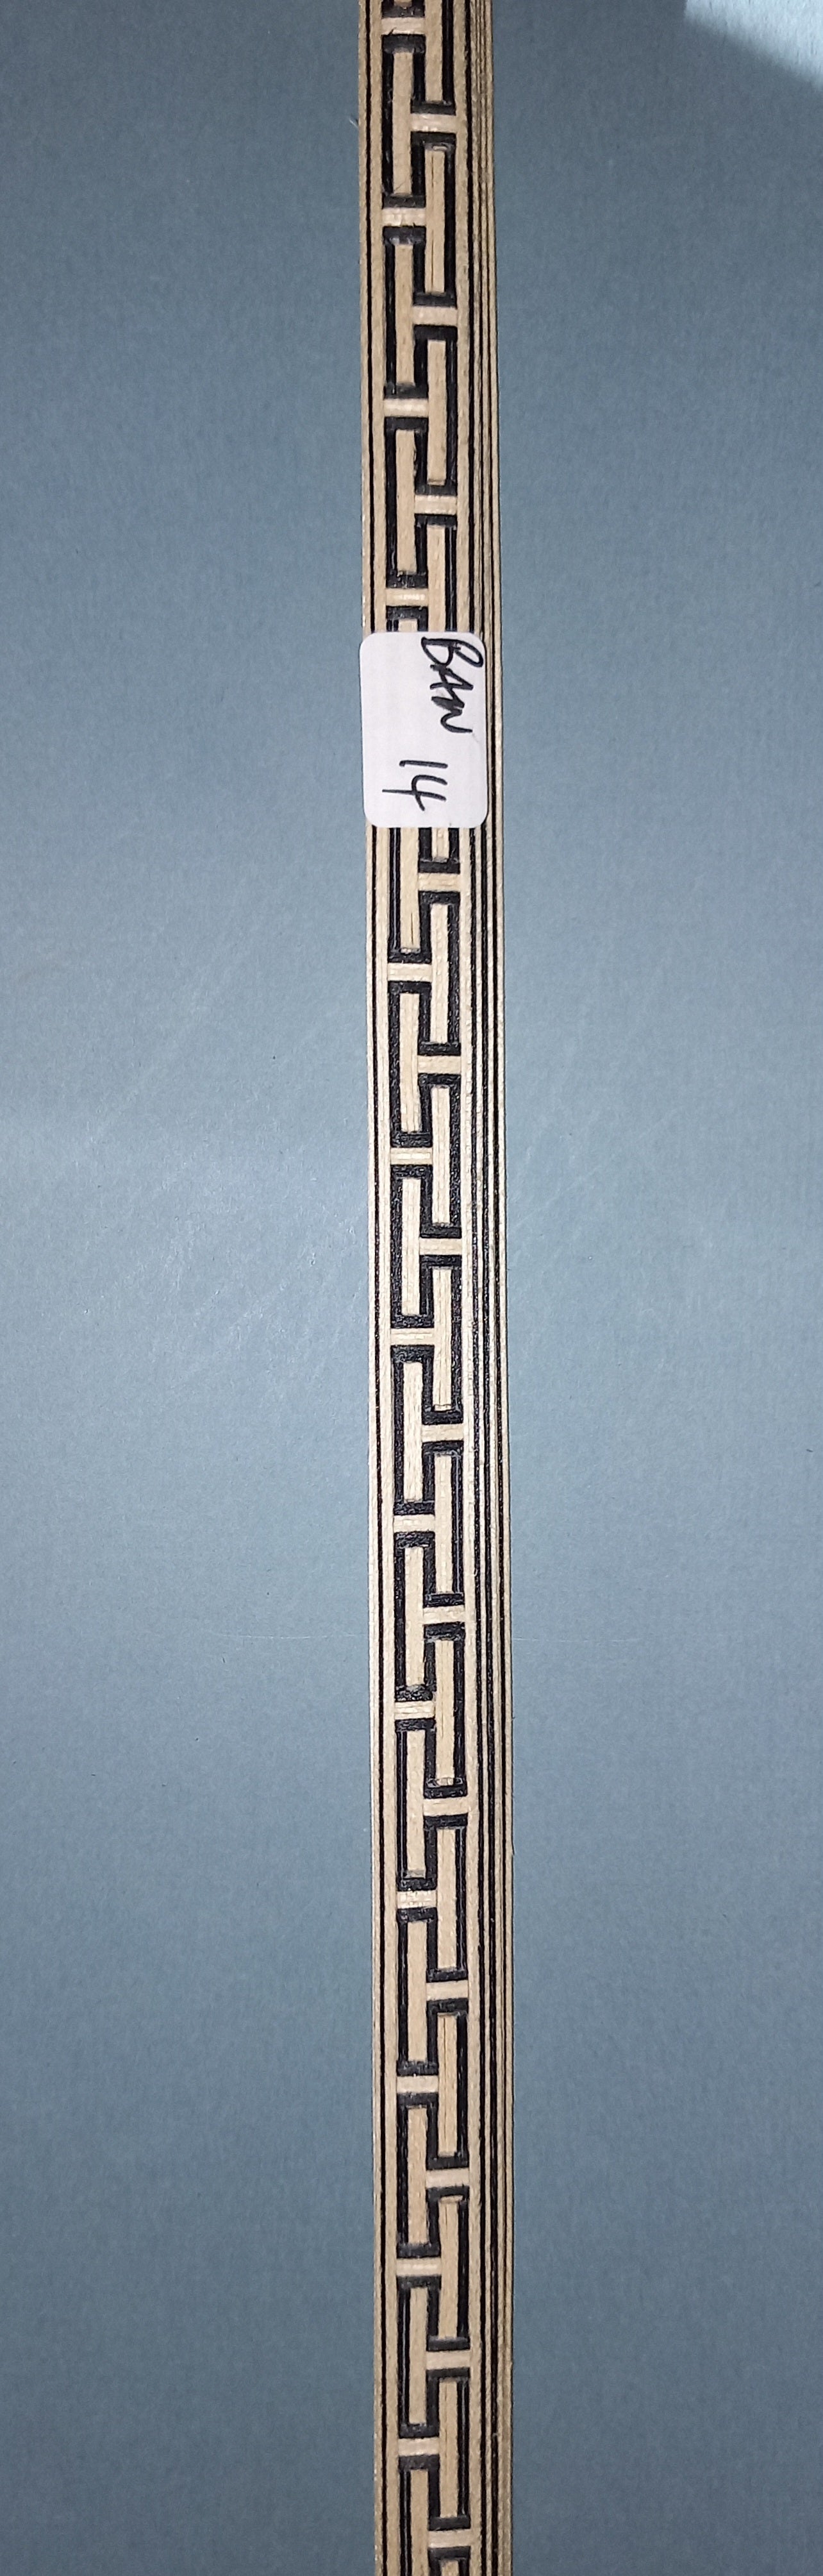 GRECIAN KEY MARQUETRY INLAY BANDINGS 0.5MM THICK   1 X 100 CM